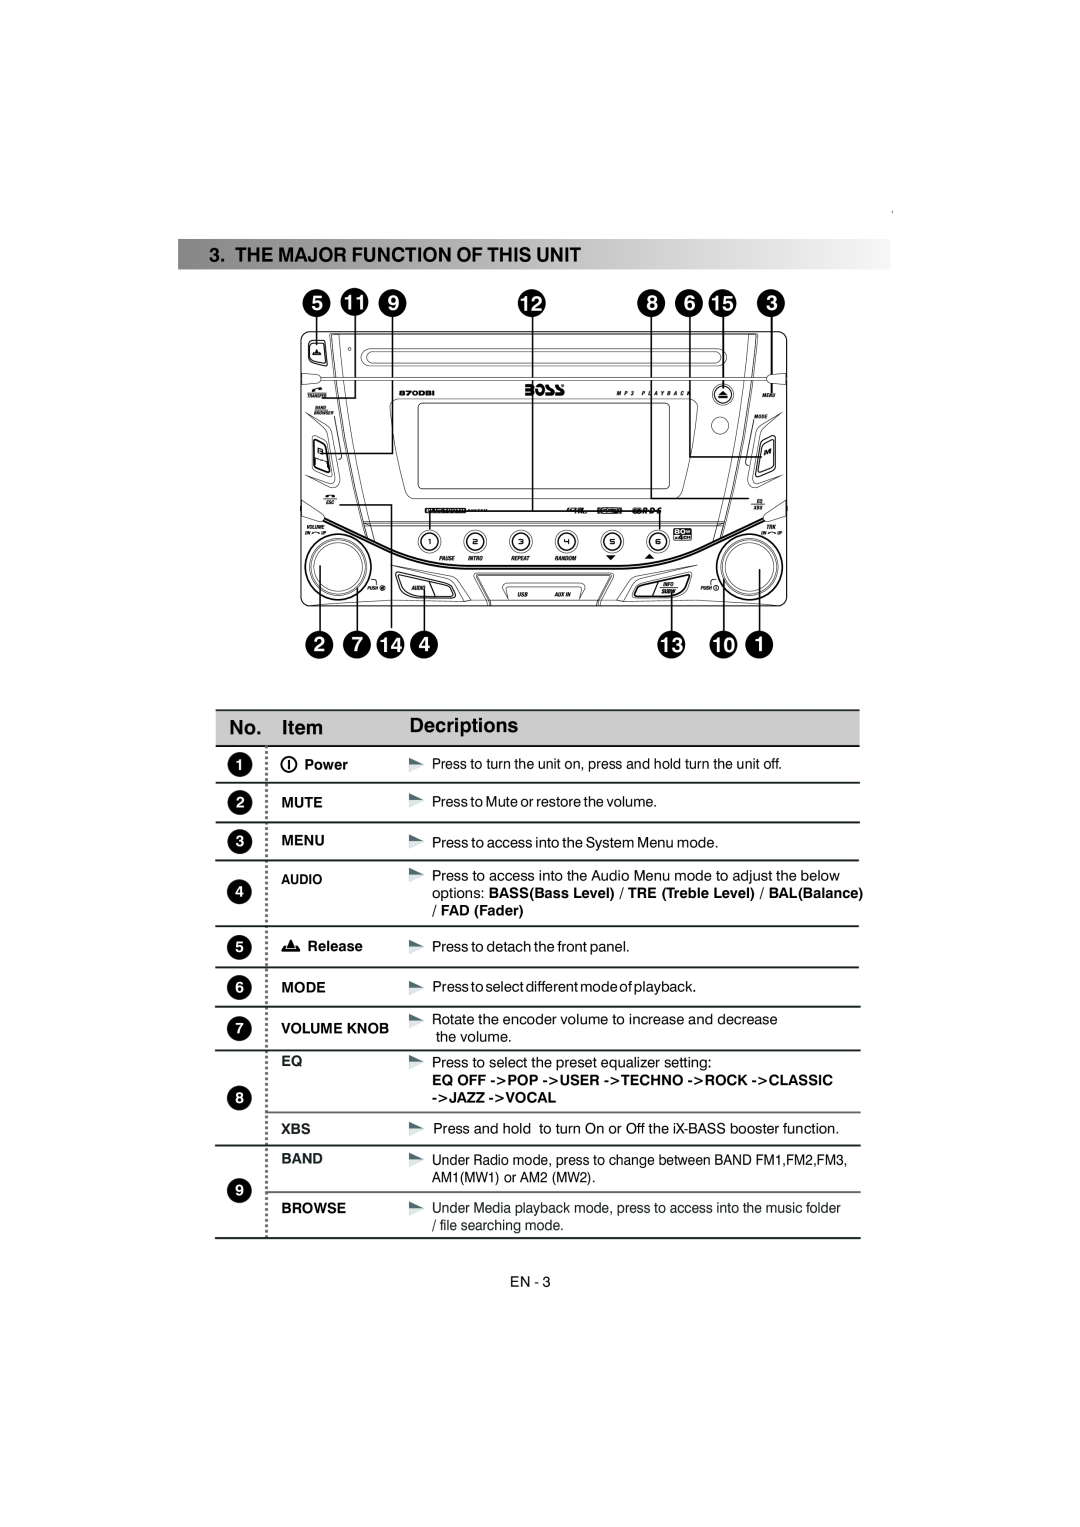 Boss Audio Systems 870DBI manual The Major Function Of This Unit, Decriptions 